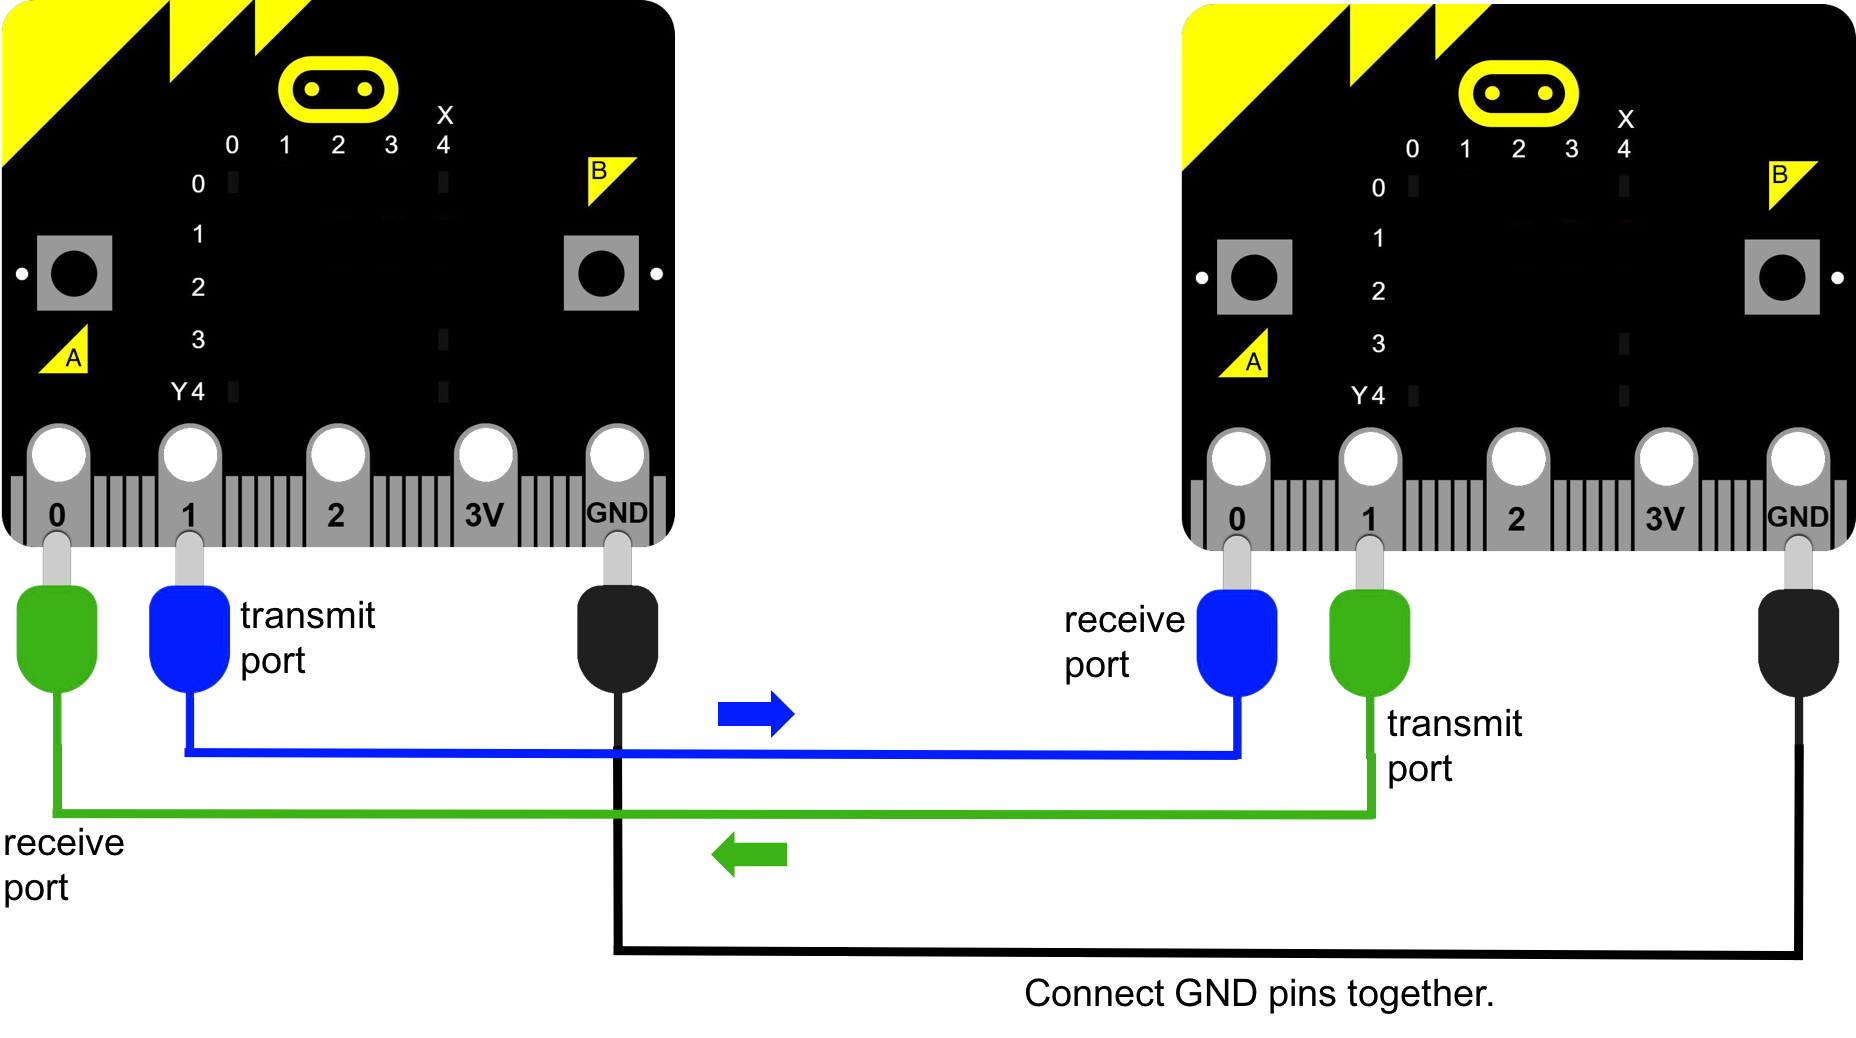 Diagram of two micro:bits connected together with three cables. Both devices are yellow Each device has a grid: an X axis labelled 0, 1, 2, 3, 4; and a Y axis labelled 0, 1, 2, 3, 4. Each device has two buttons labelled A and B. Each device has five pins labelled 0, 1, 2, 3V and GND. Connecting cable 1 is connected to Device 1, Pin 0. This is labelled receive port. It is connected to Device 2 on Pin 1. This is labelled receive port. This cable is green. Connecting cable 2 is connected to Device 1. This is labelled transmit port. It is connected to Device 2 on Pin 0. This is labelled receive port. This cable is blue. Connecting cable 3 connects the GND pins on the two devices together. This cable is black.